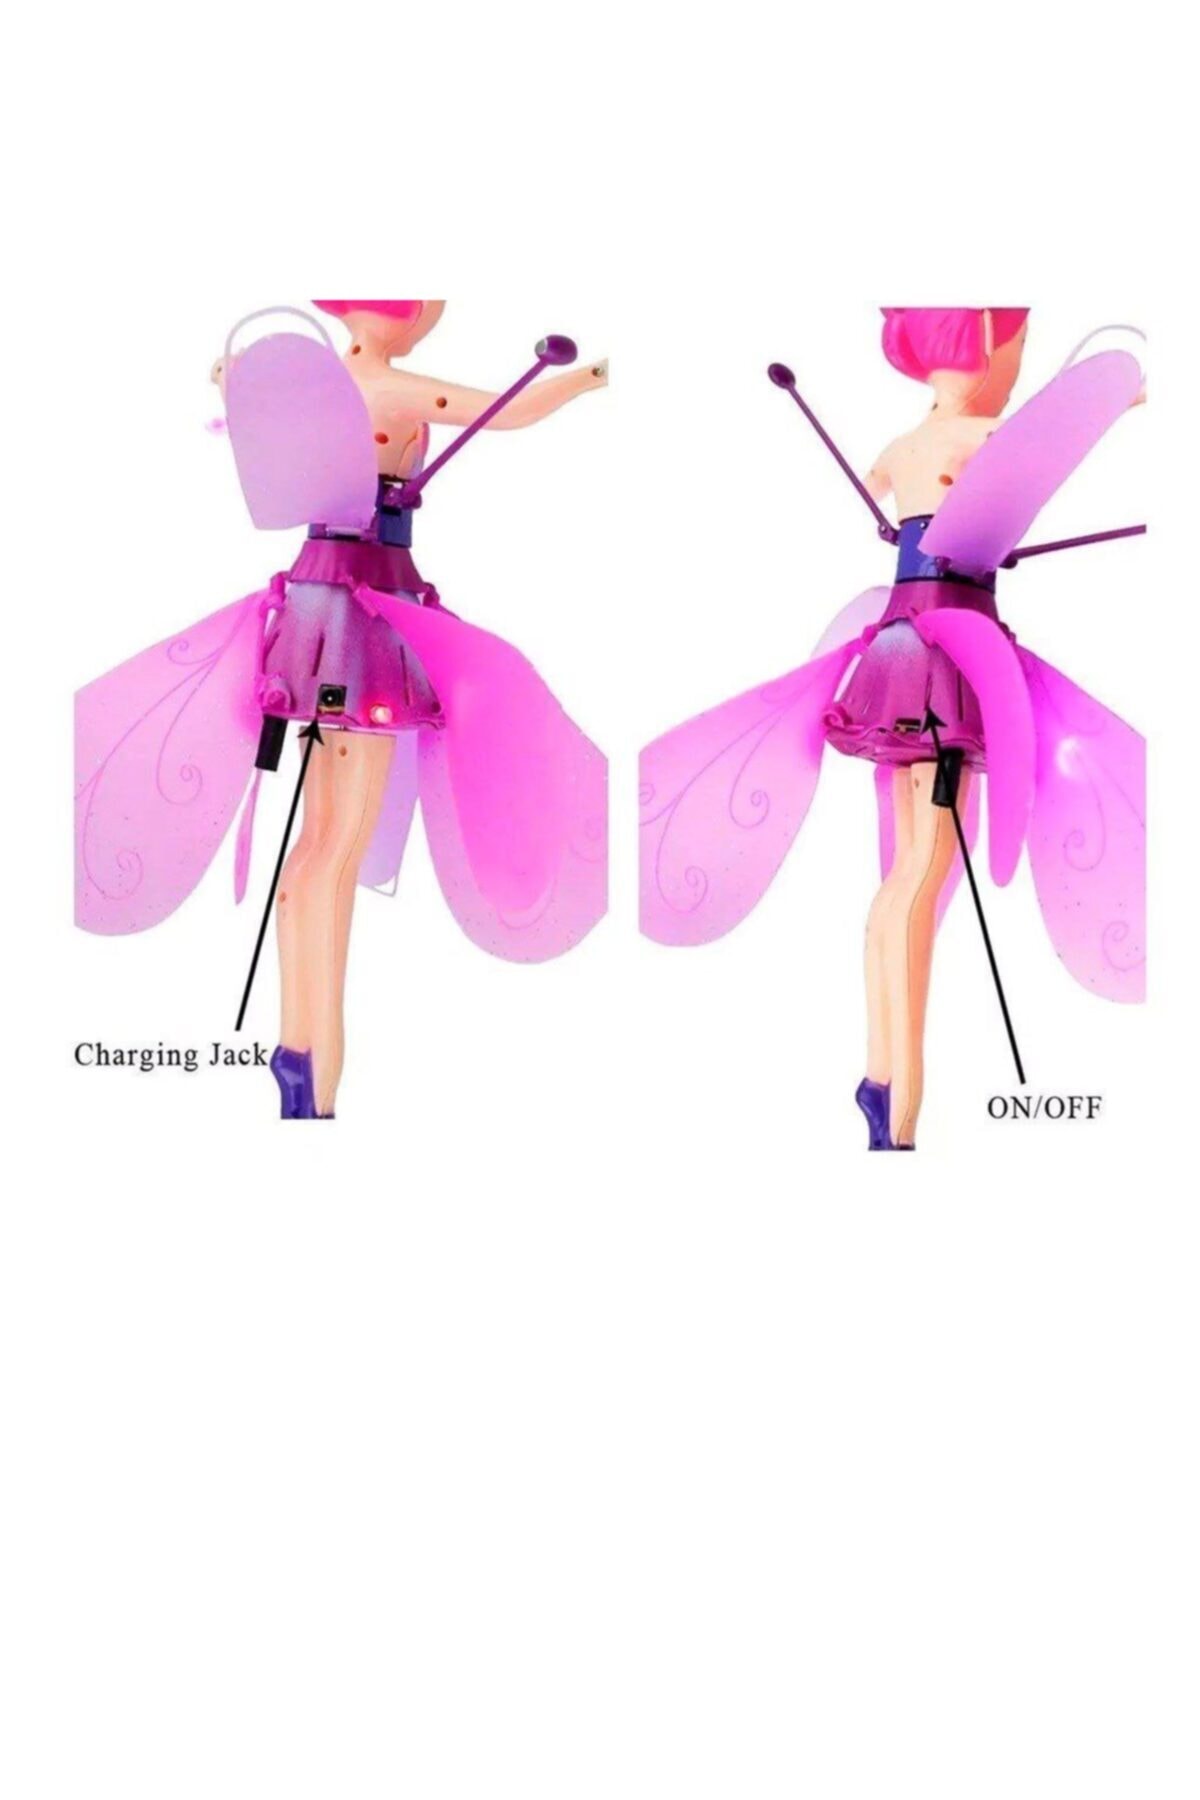 Flying-Fairy-Toy-Magic-Flying-Fairy-Pink-With-Charged-Motion-Sensor-For-Children-Kids-Girls-Fun-2.jpg